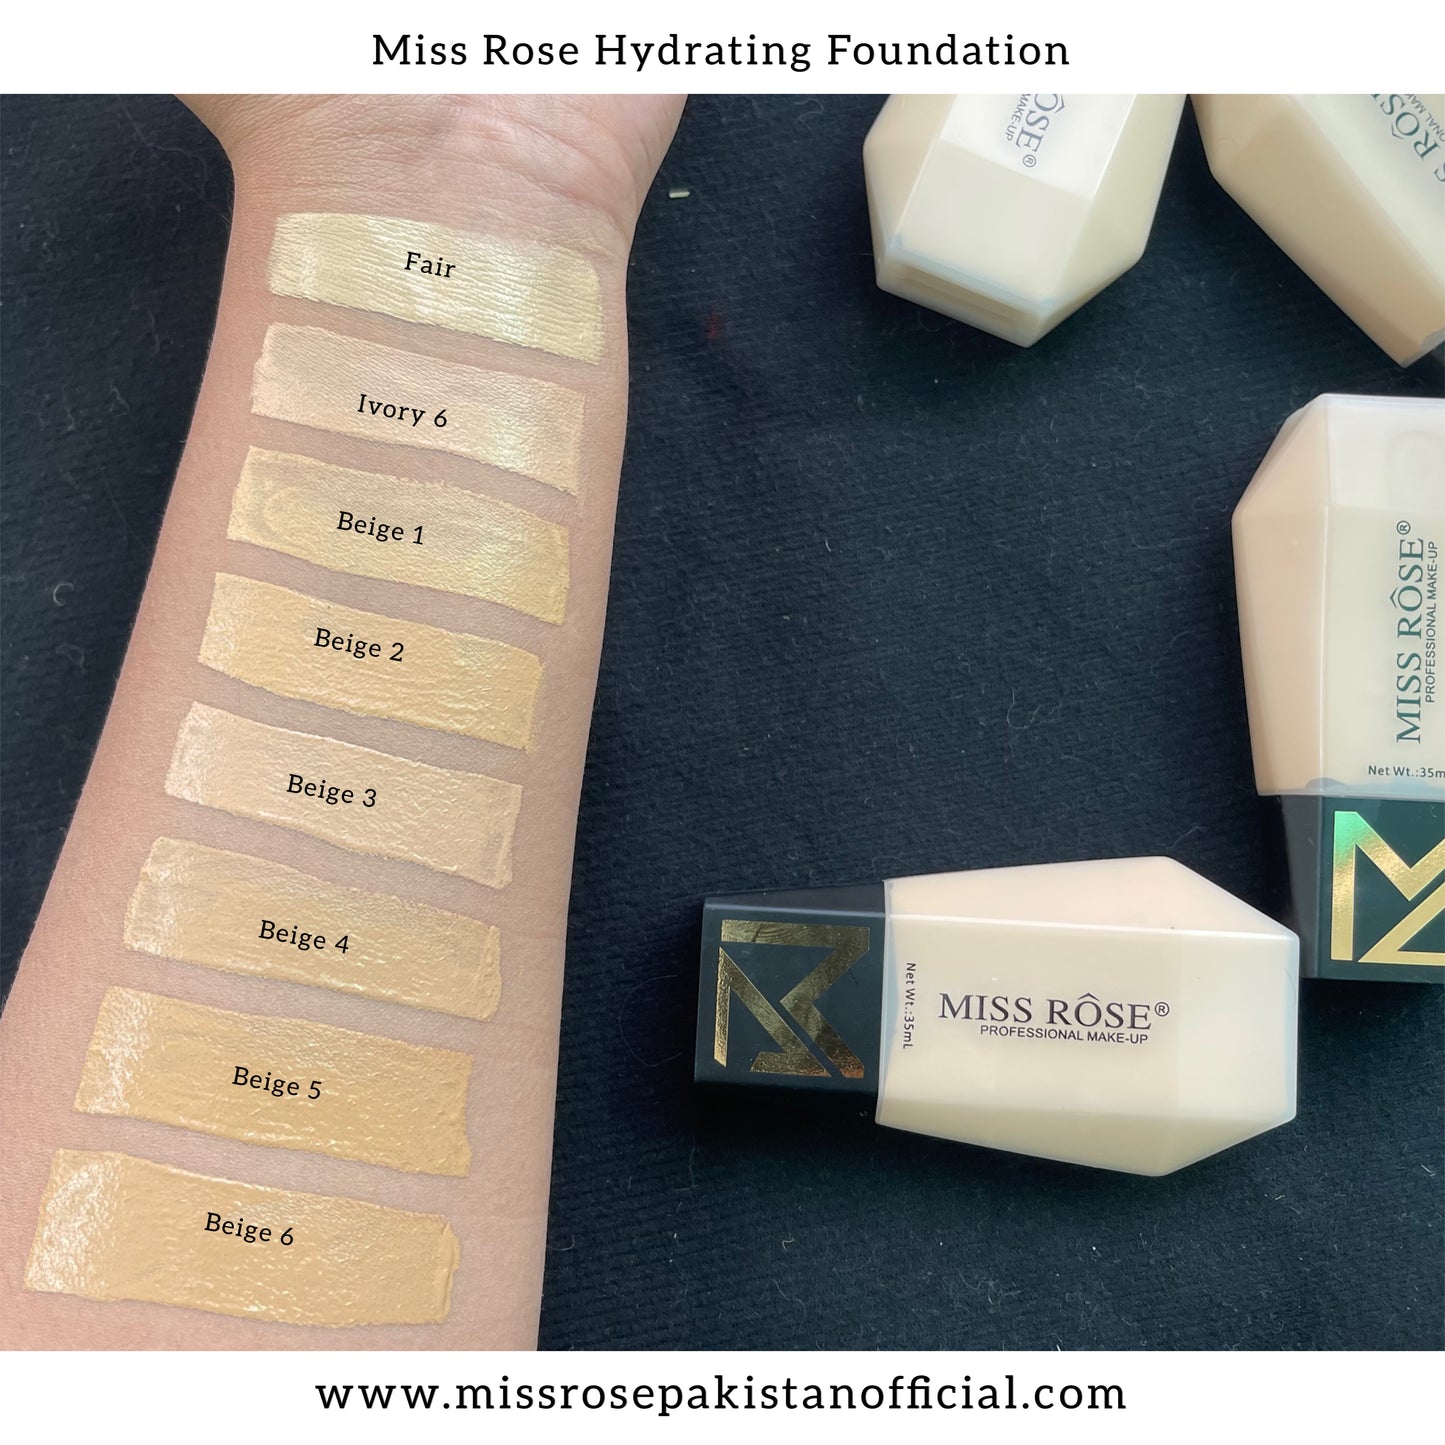 Miss Rose Hydrating Foundation